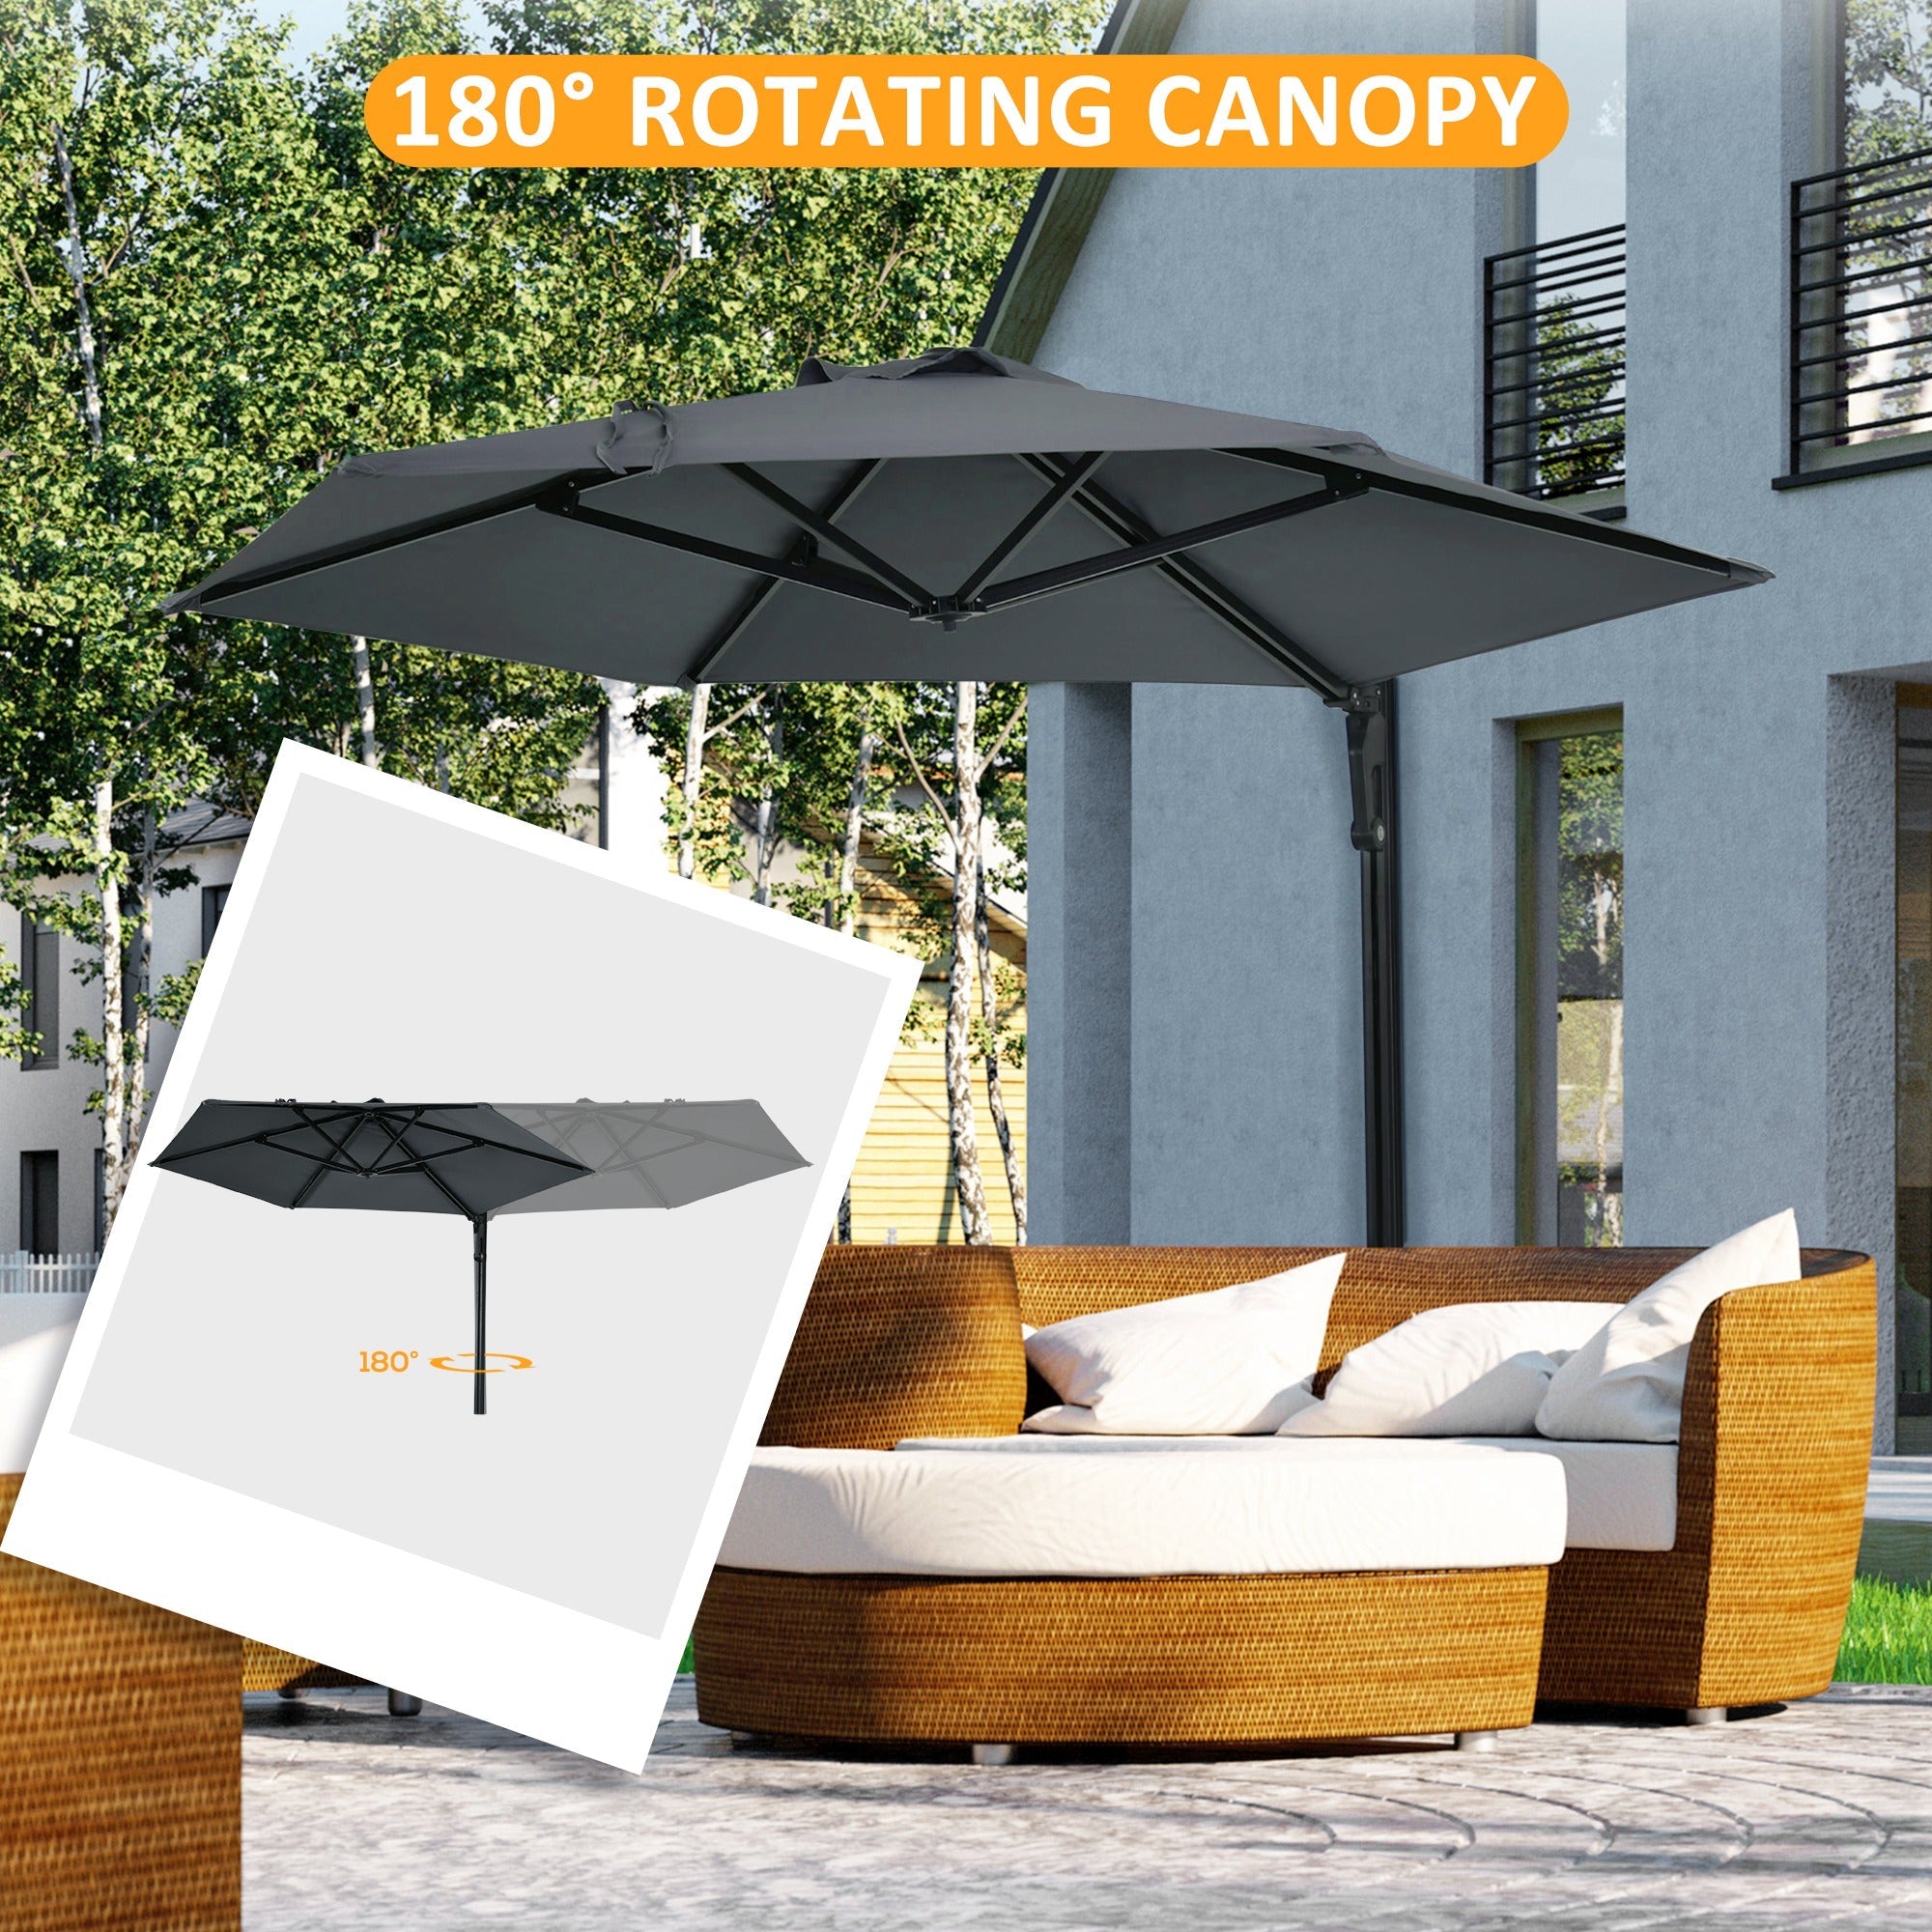 Wall Mounted Parasol, Hand to Push Outdoor Patio Umbrella with 180 Degree Rotatable Canopy for Porch, Deck, Garden, 250 cm, Dark Grey-3